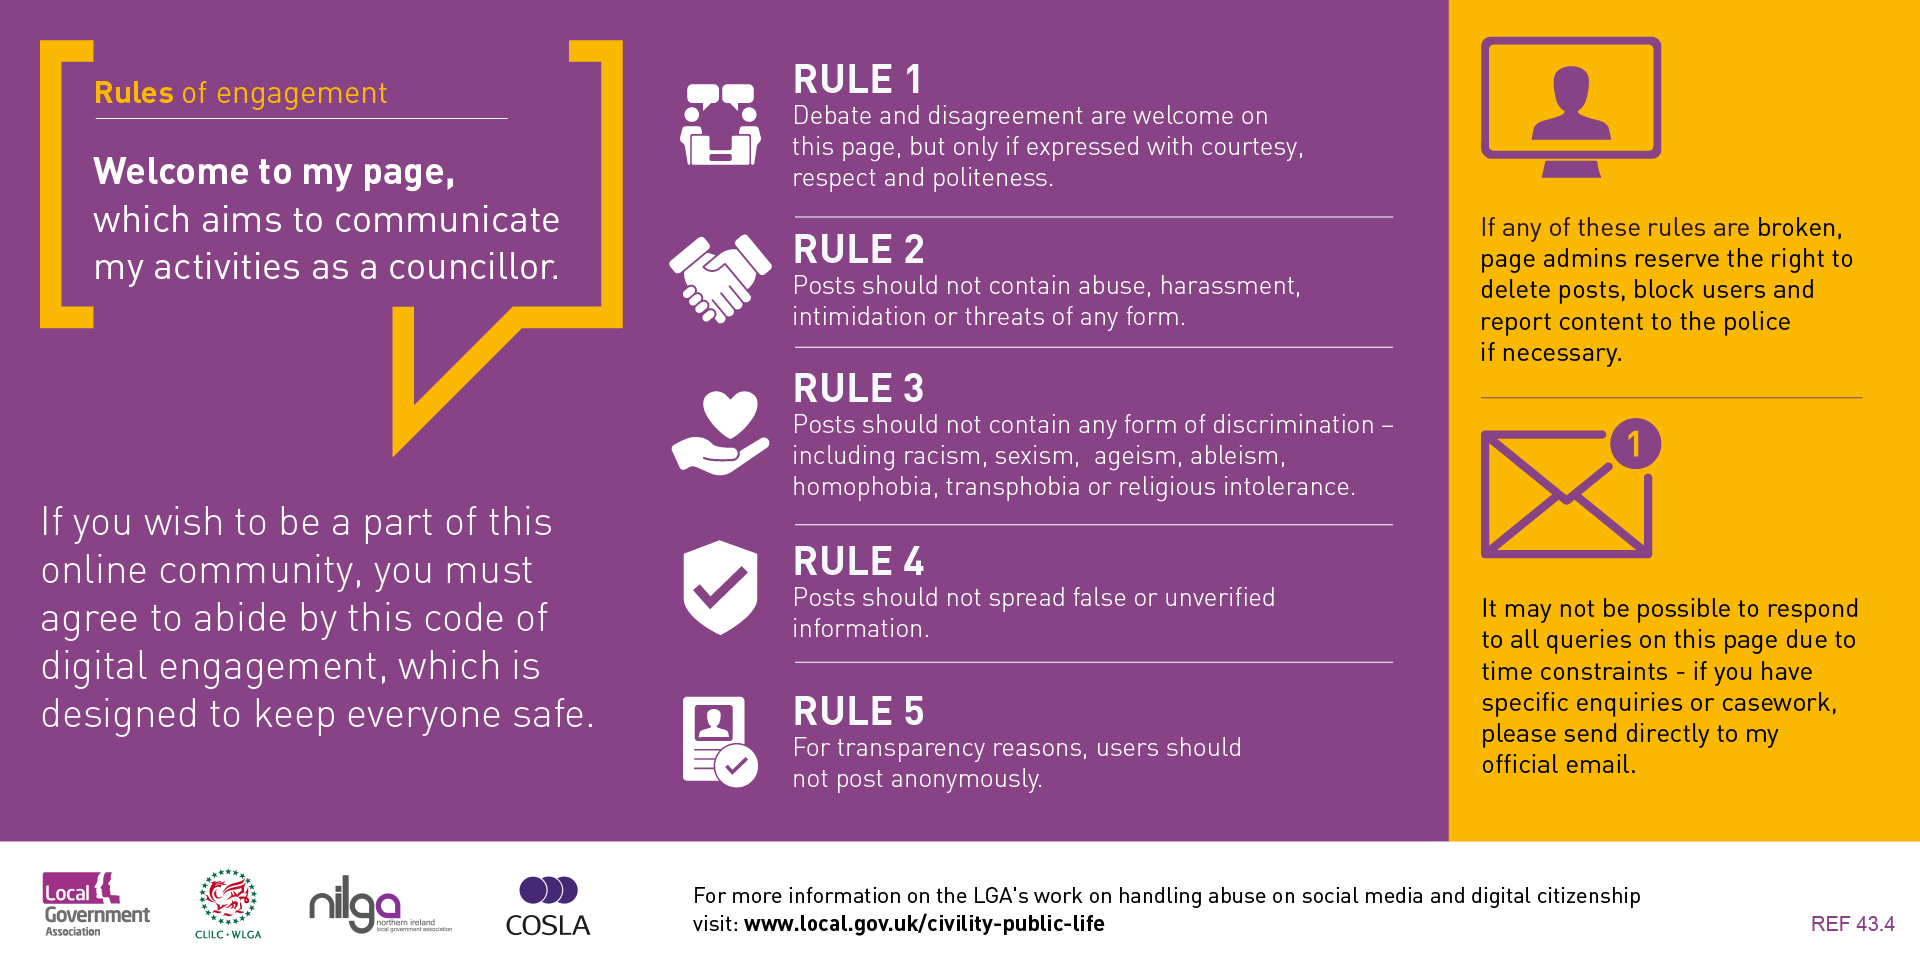 An infographic setting out the rules of engagement for a councillor's social media page. These rules are designed to give all users a clear ‘code’ by which they should operate, with a clear statement that users can be blocked, or posts deleted, if they fail to participate in a civil manner.